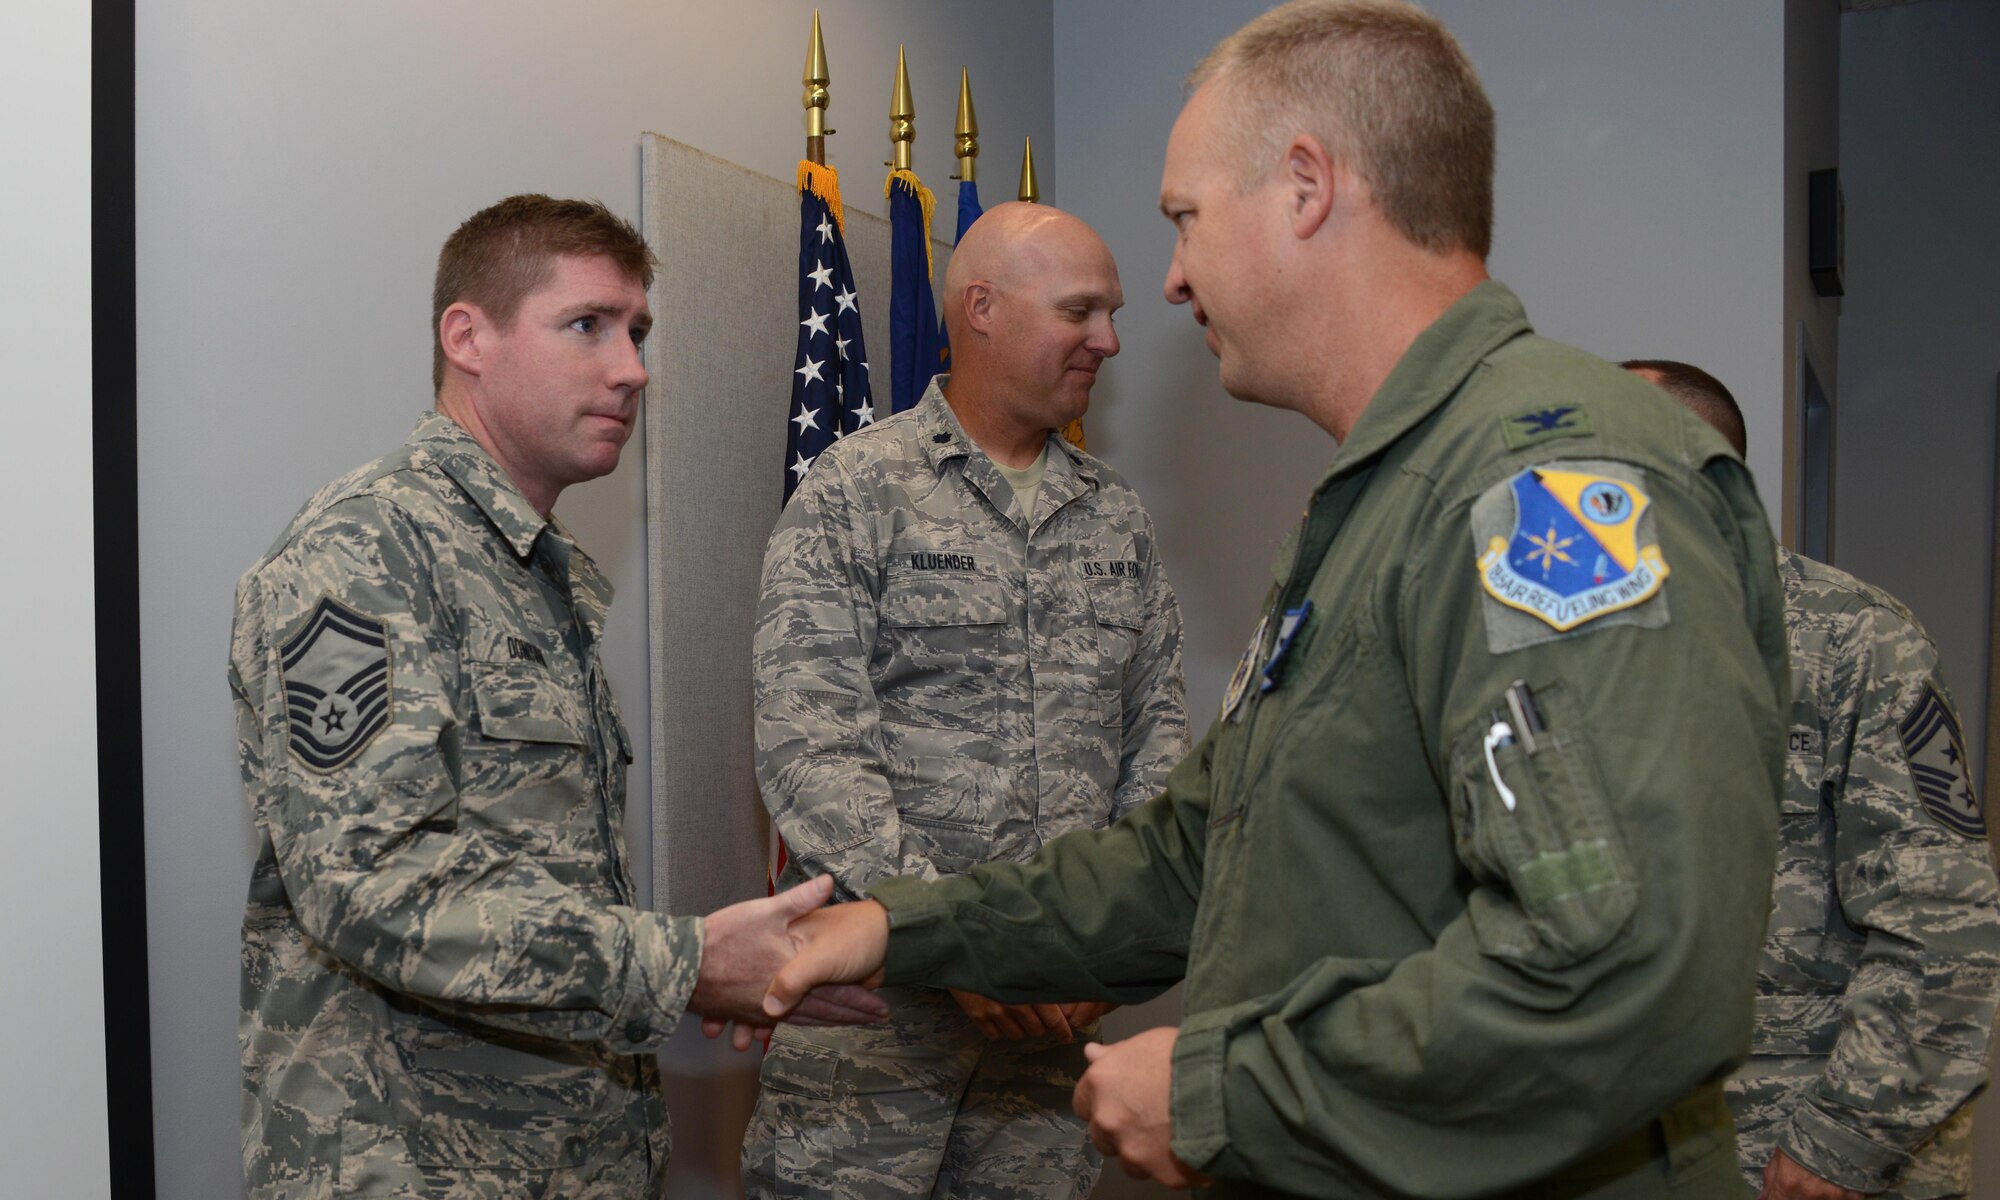 185th Air Refueling Wing Commander Col. Larry Christensen presents Senior Master Sgt. Joe Donovan of the 185th Financial Management office with Commanders coin at the Sioux City, Iowa Air National Guard base on June 21, 2017. Donovan and the rest of the Financial Management office were given coins in recognition of their receiving two top financial management awards for achievement and mission impact. 
U.S. Air National Guard photo by Master Sgt. Vincent De Groot/185ARW Wing PA 